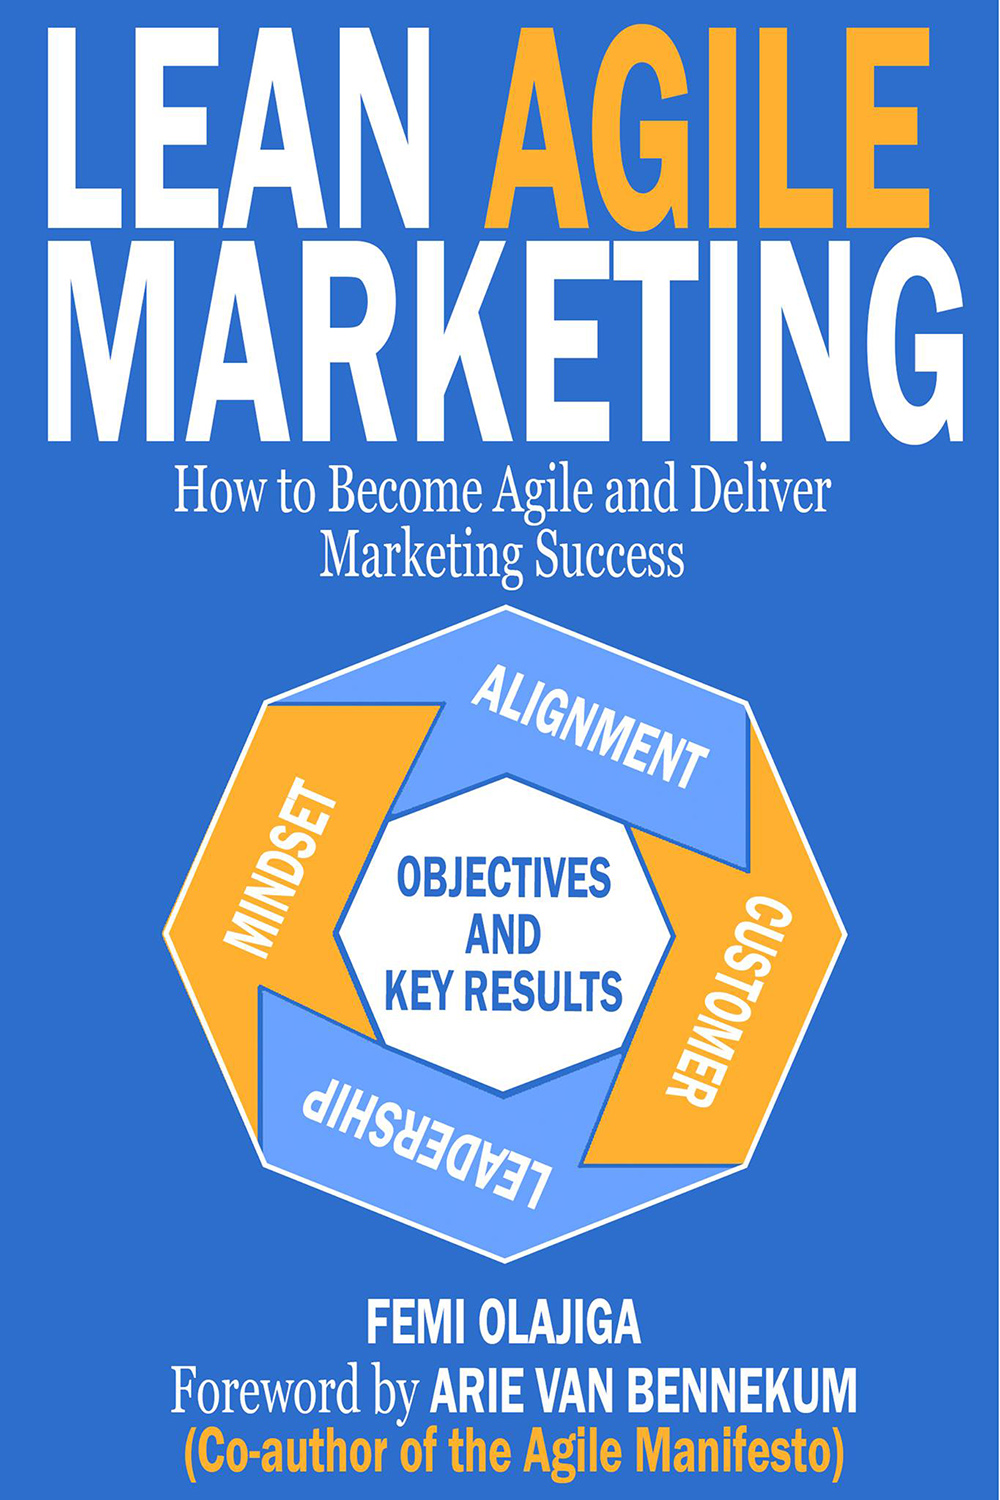 Lean Agile Marketing How to Become Agile and Deliver Marketing Success - image 1